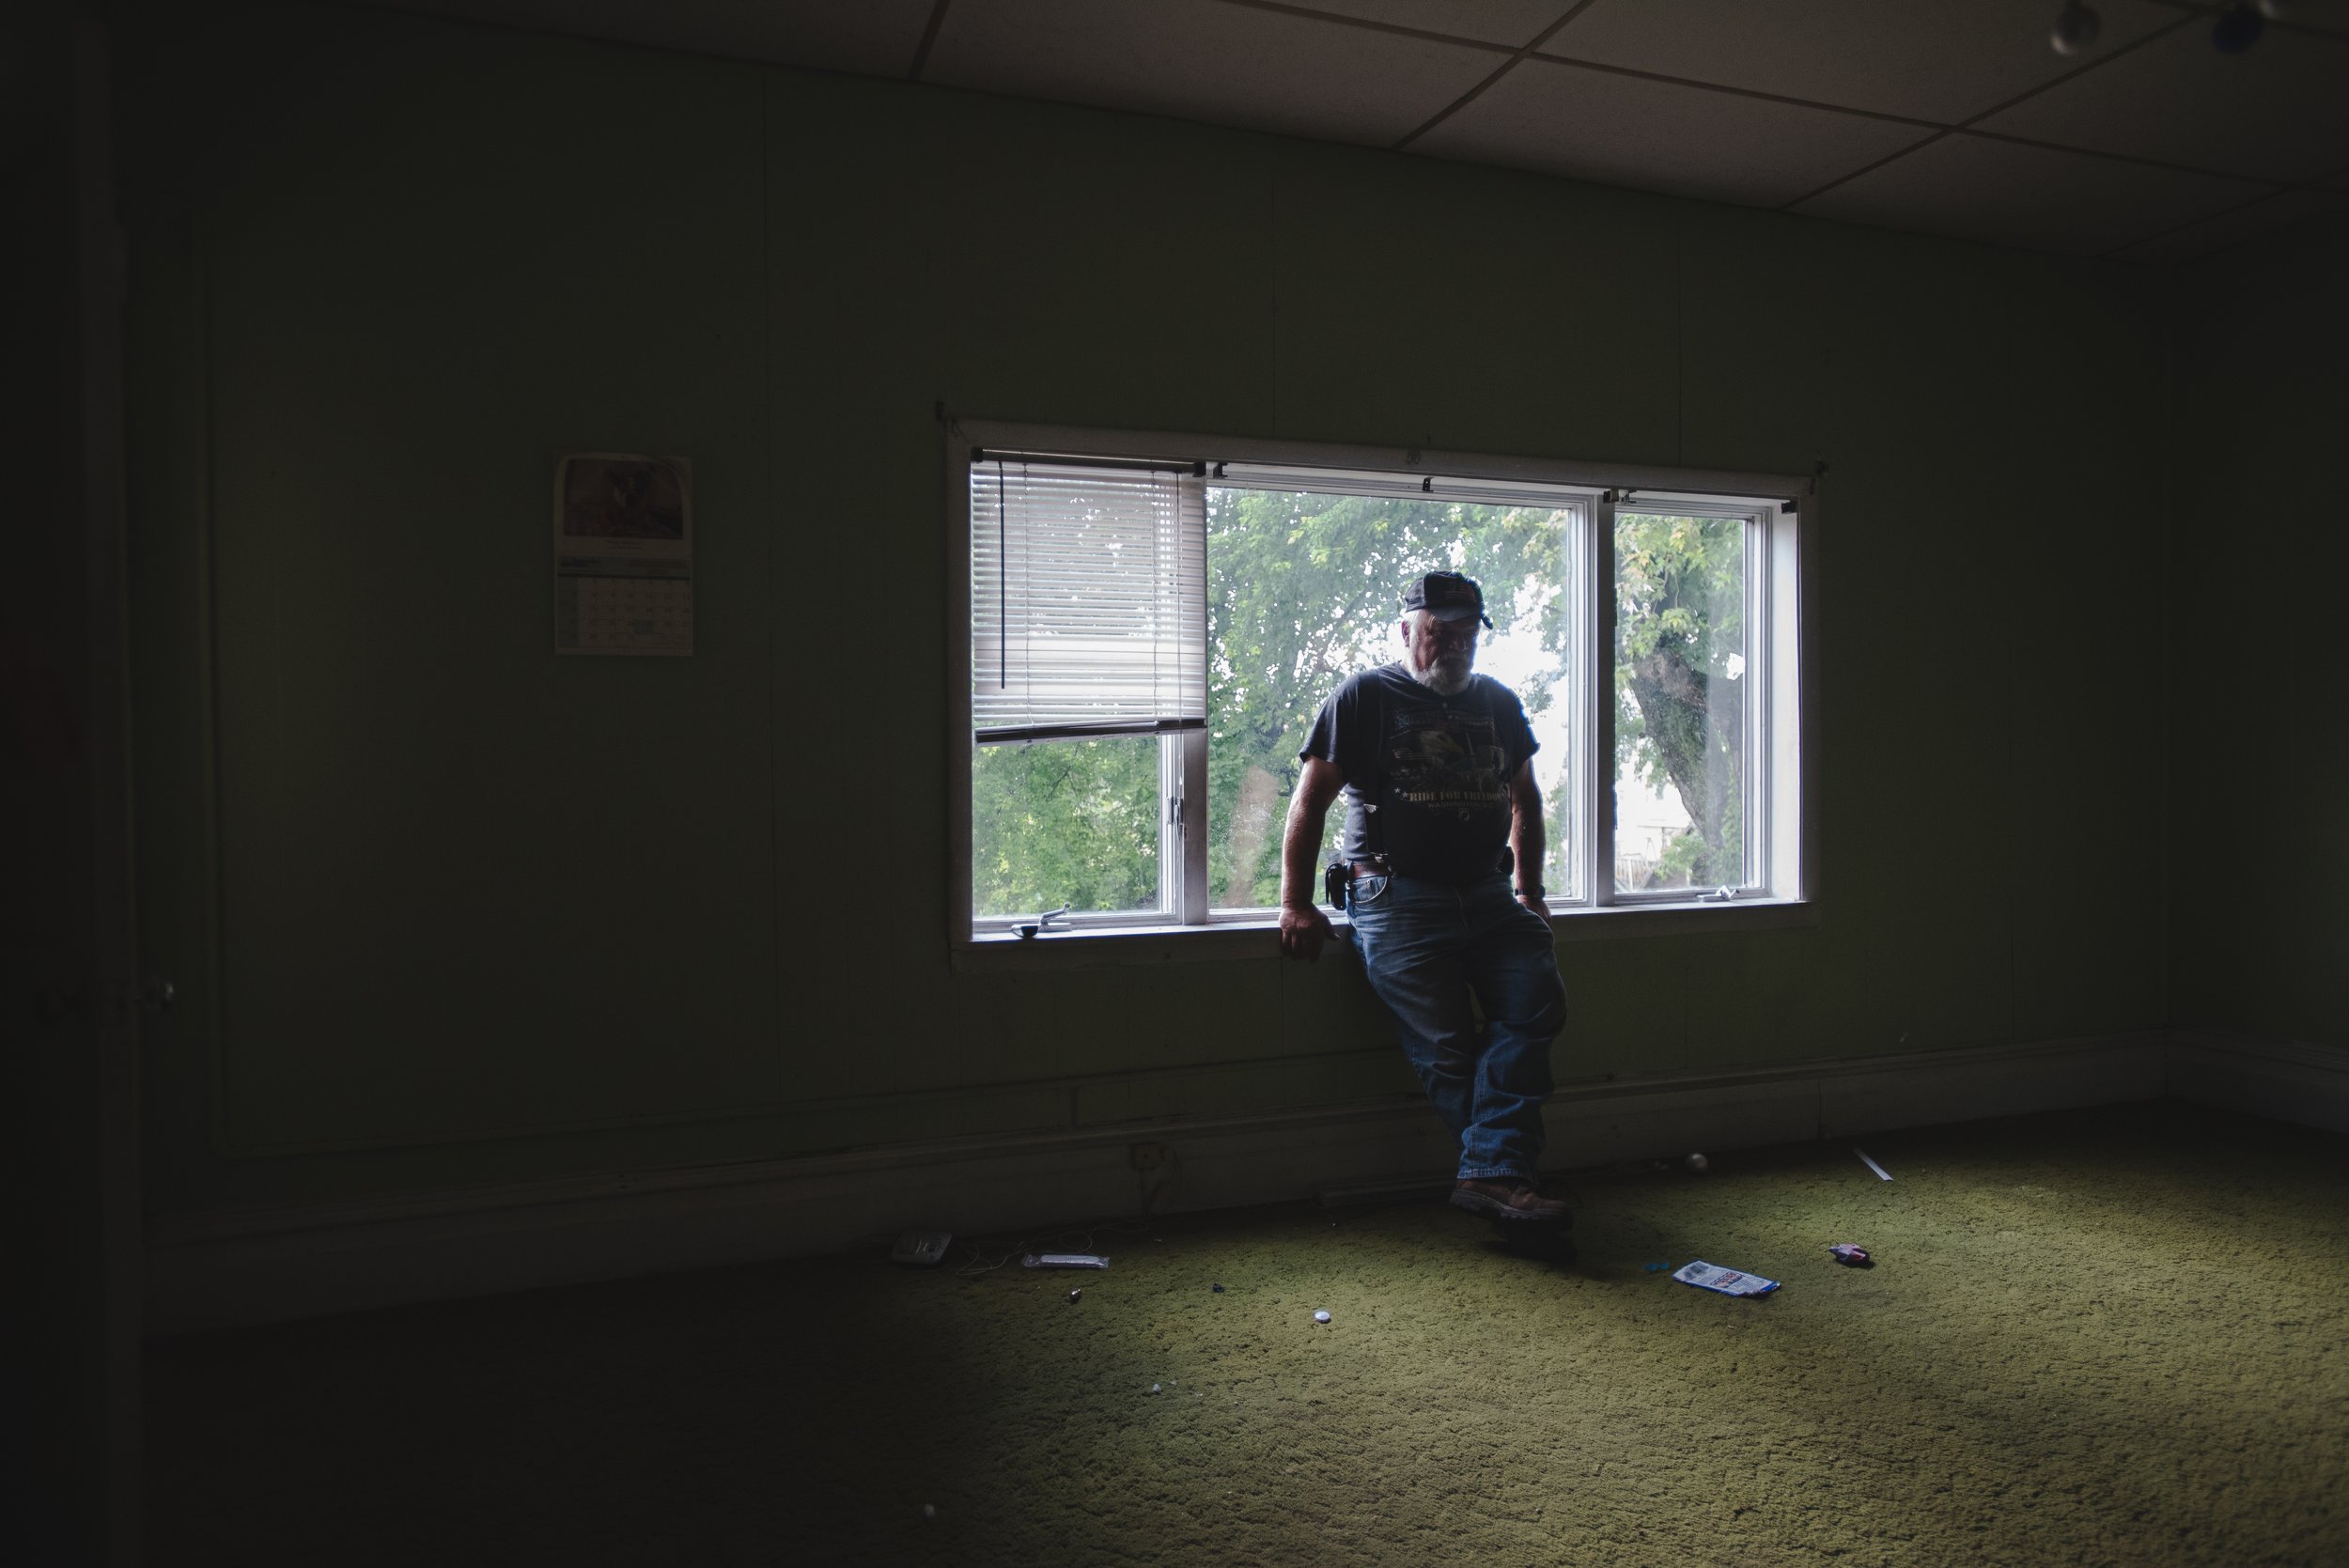  Kenneth White, who put in 30 years of active service in the U.S. Air Force and U.S. Coast Guard, is part of a grassroots effort to convert an abandoned house in Uniontown, Pennsylvania, into a place for homeless veterans to rebuild their lives, whic